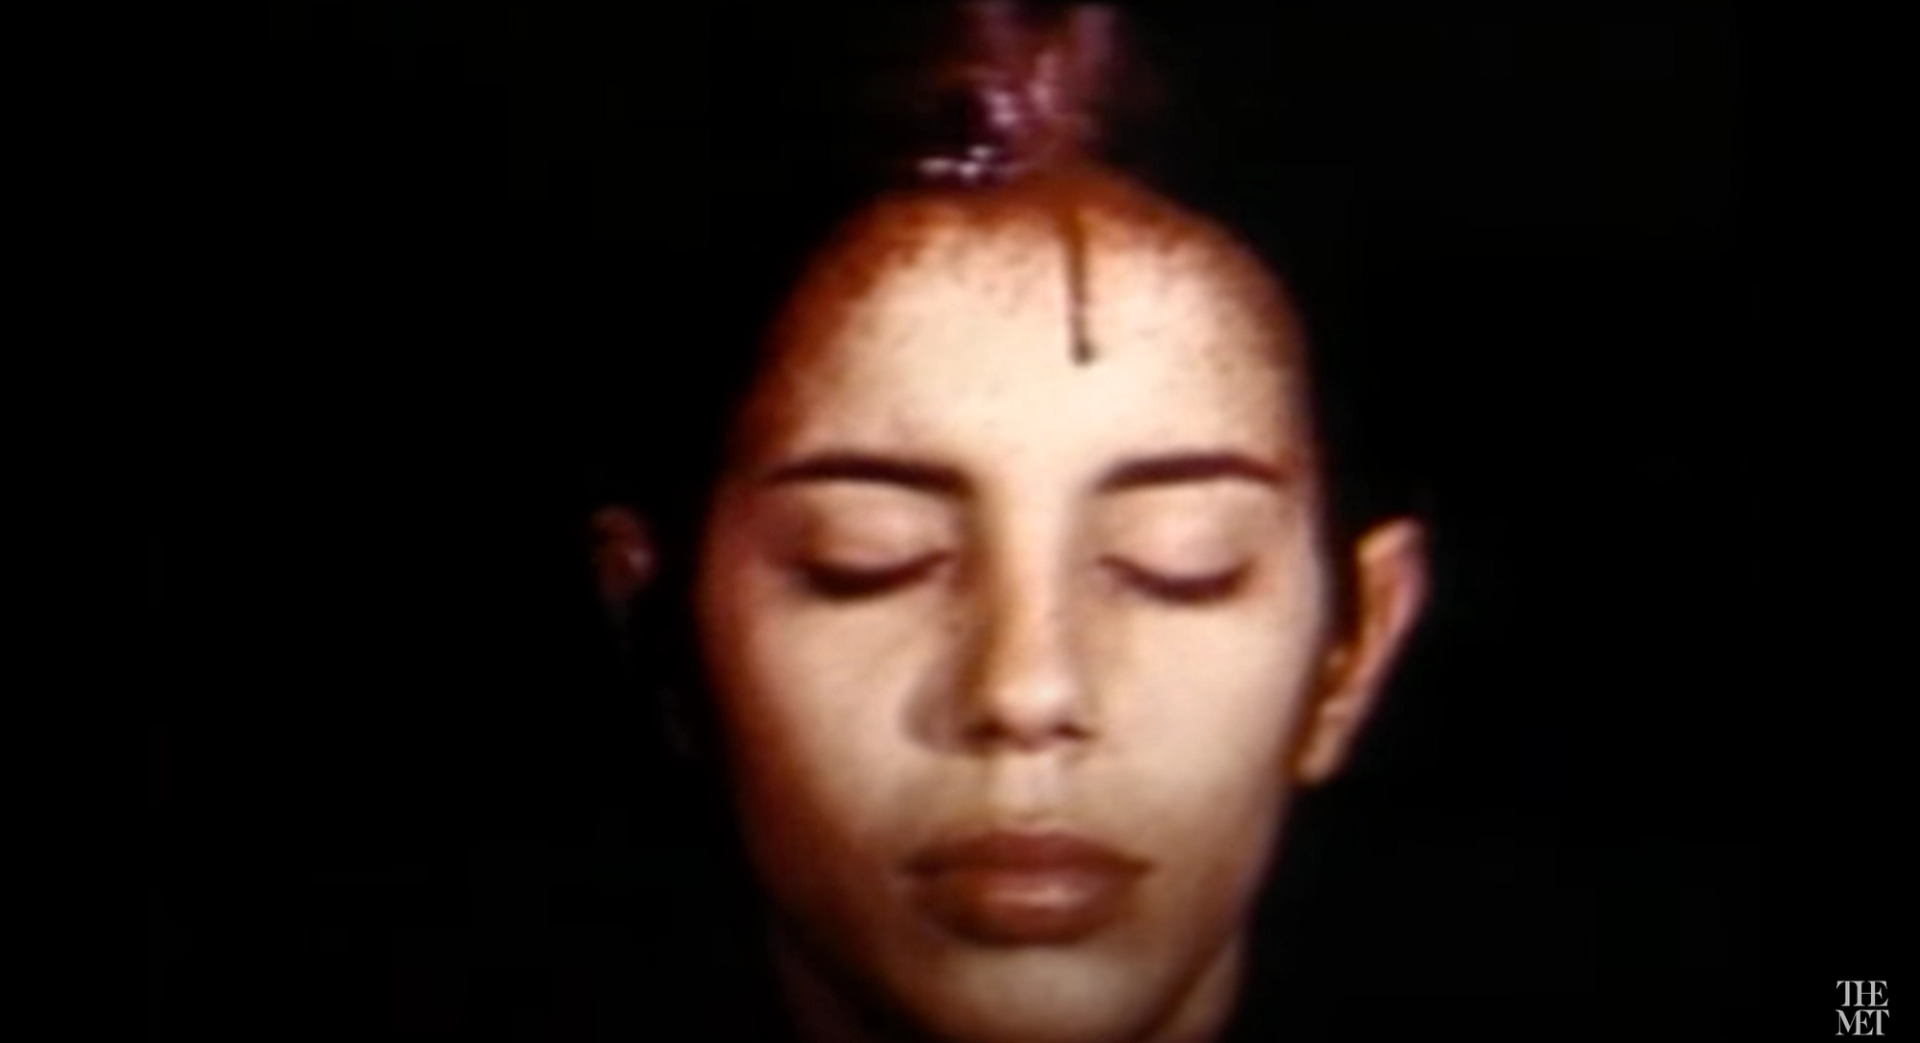 An image of the artist Ana Mendieta from one of her performances. She has her eyes closed as a red substance drips over her forehead.